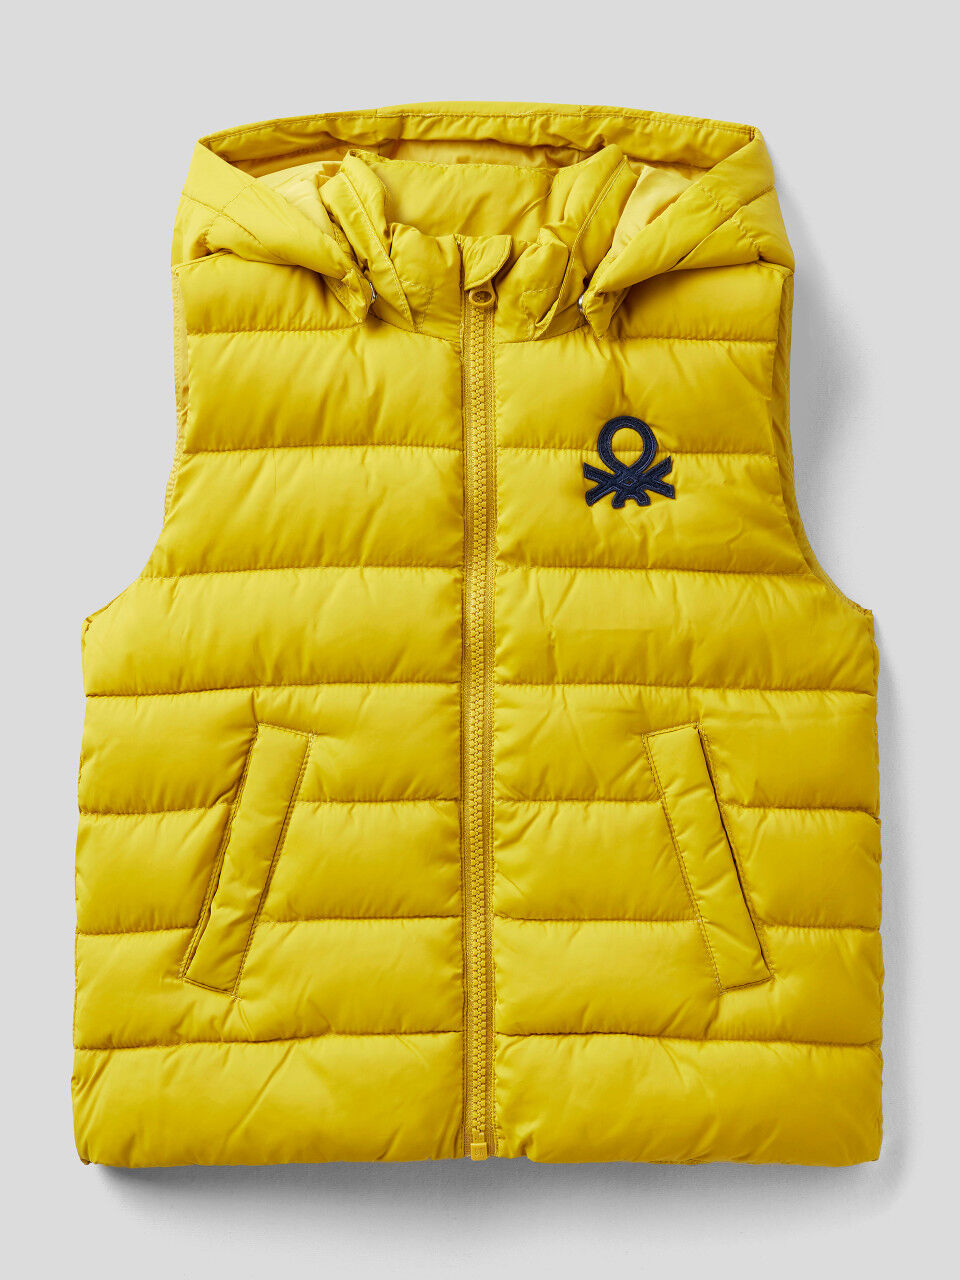 Padded vest with removable hood